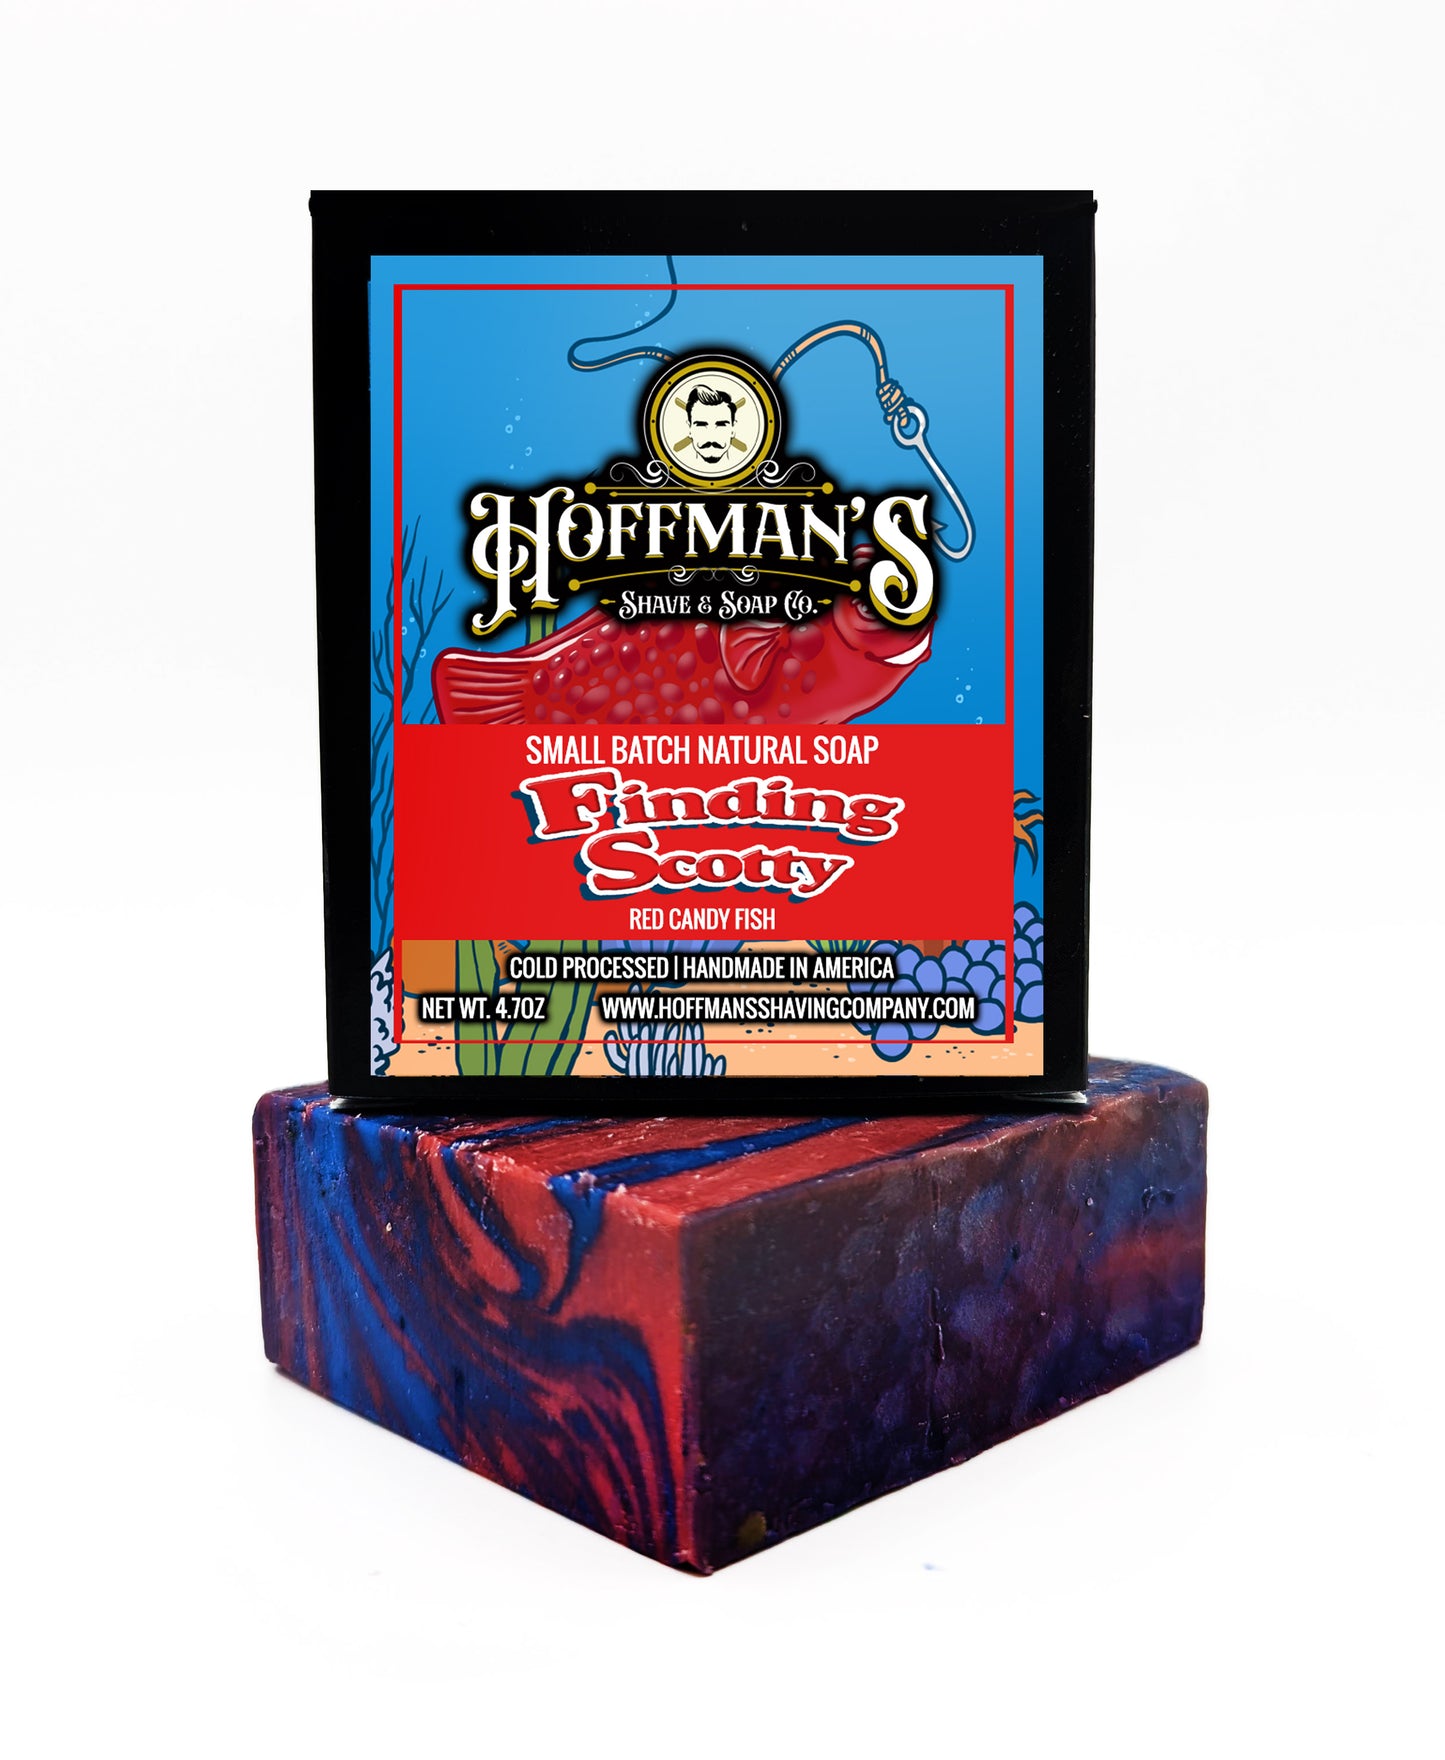 Finding Scotty Soap Bar | Finding Scotty Soap | Hoffman's Grooming